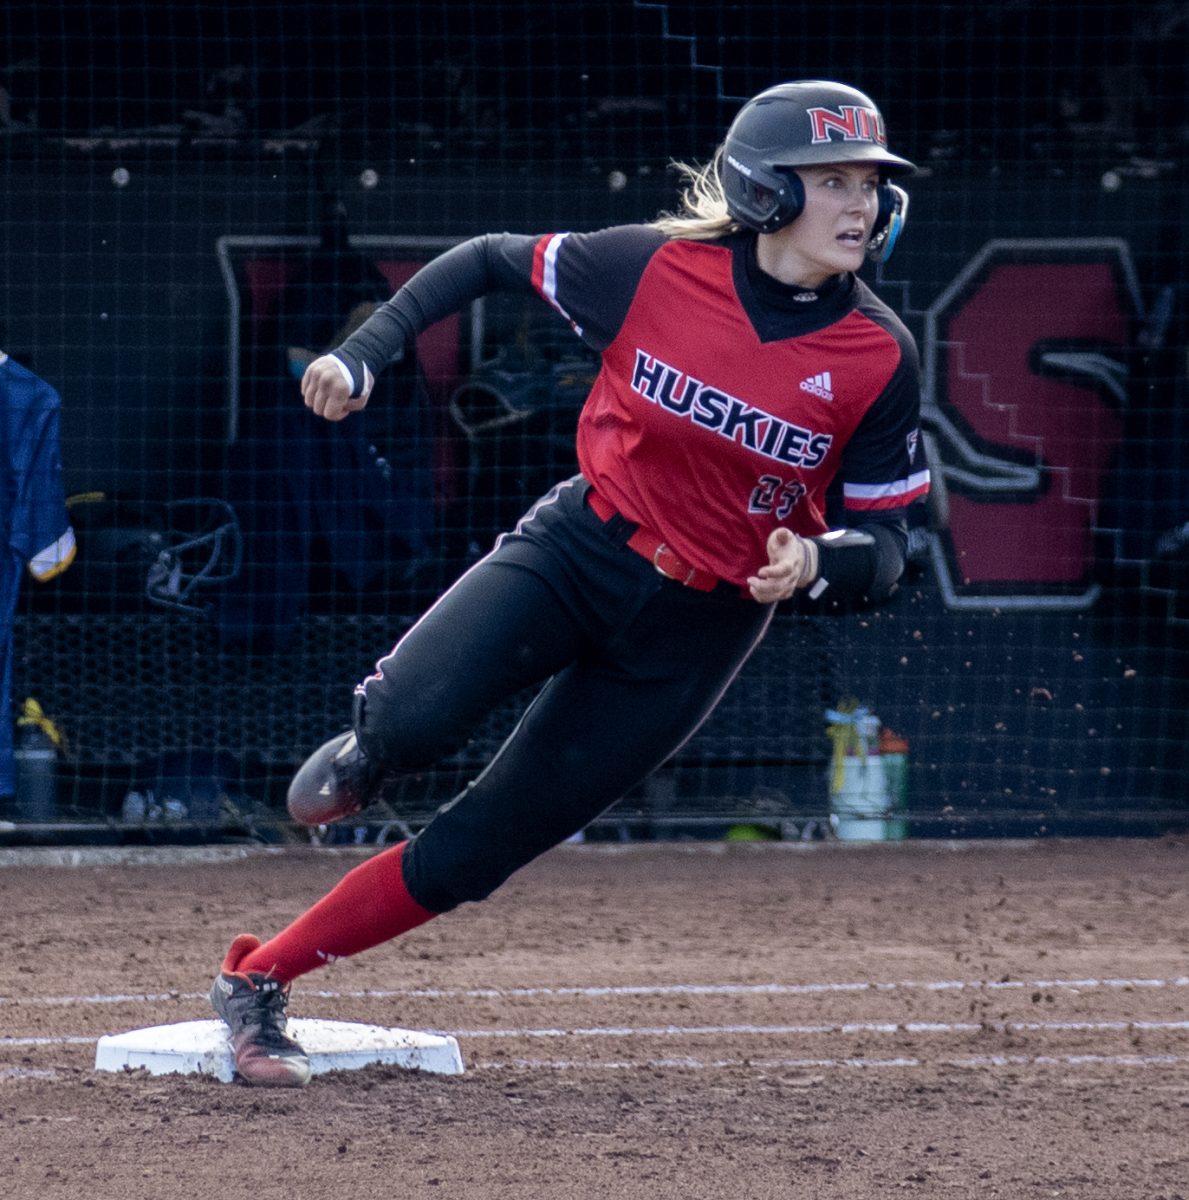 Senior+catcher%2Foutfielder+Ellis+Erickson+%2823%29+rounds+first+base+after+hitting+a+single+on+March+30+against+Kent+State+University.+Erickson+was+named+to+the+Northern+Star+Sports+Staffs+MAC+softball+All-Star+squad.+%28Northern+Star+File+Photo%29